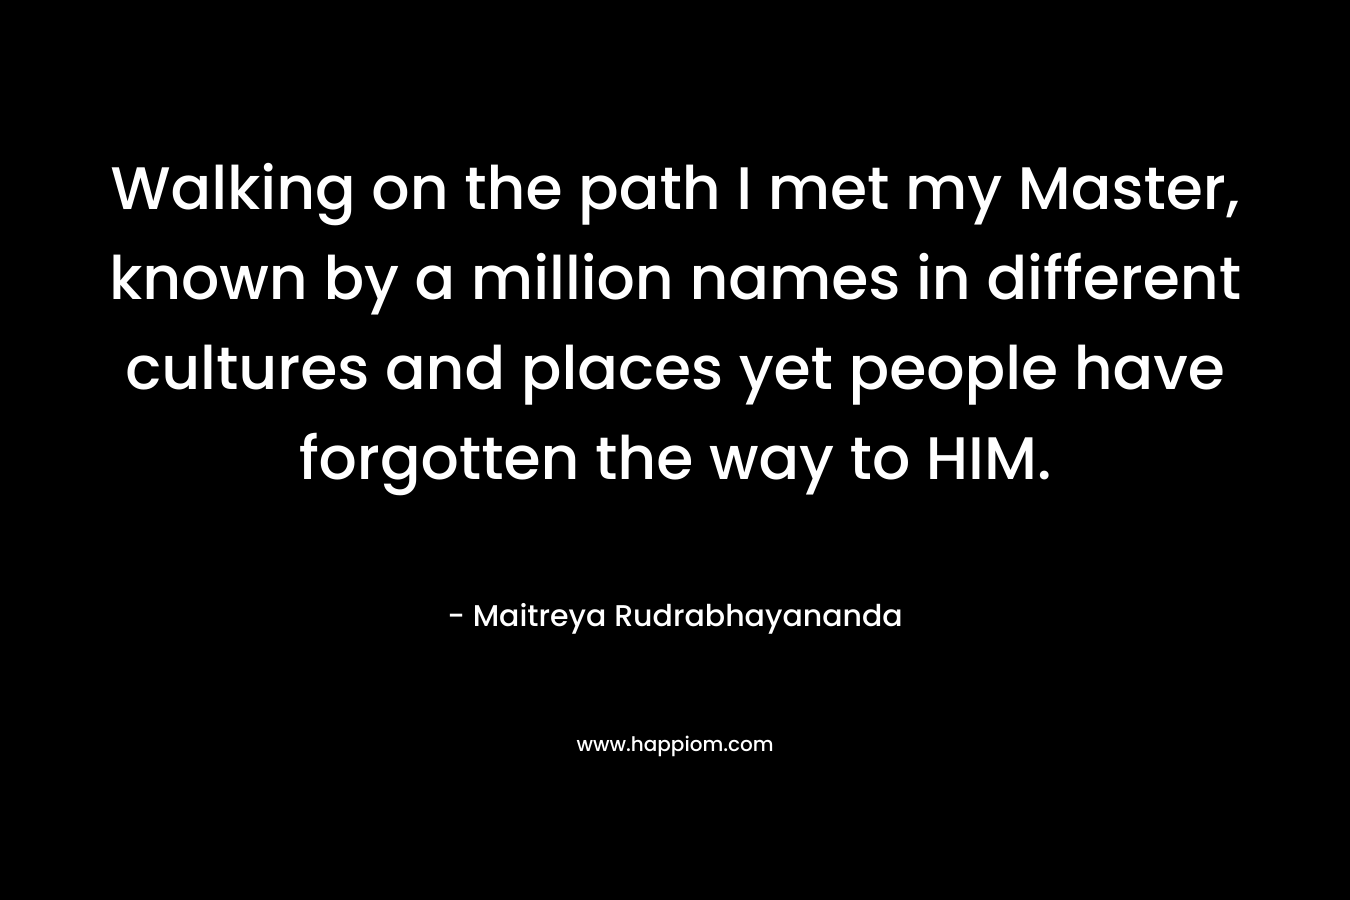 Walking on the path I met my Master, known by a million names in different cultures and places yet people have forgotten the way to HIM. – Maitreya Rudrabhayananda